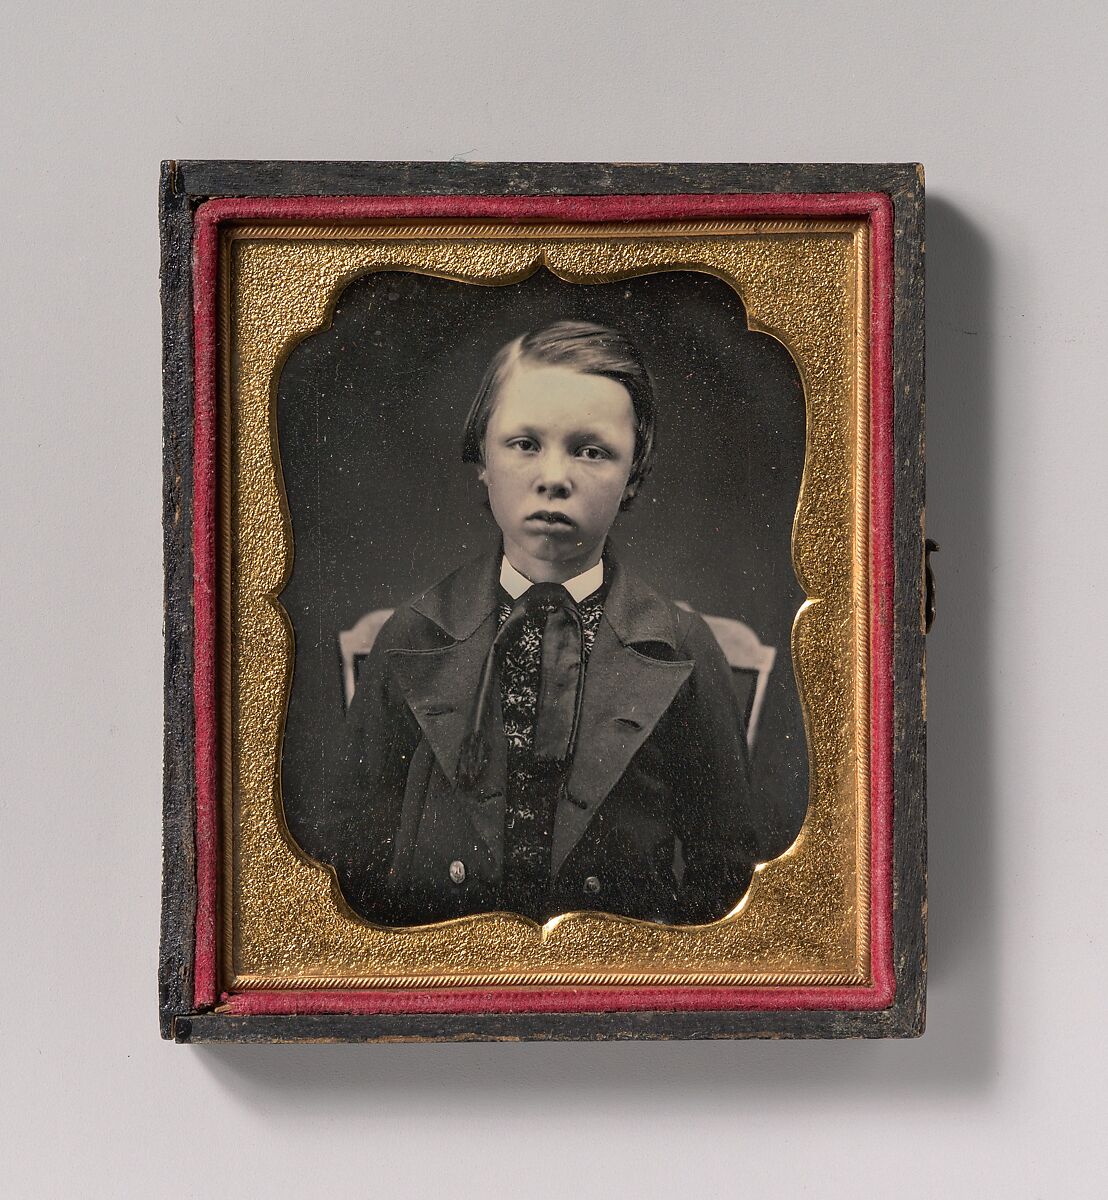 [Boy in Wide Lapelled Coat, Seated in Chair], Unknown (American), Daguerreotype 